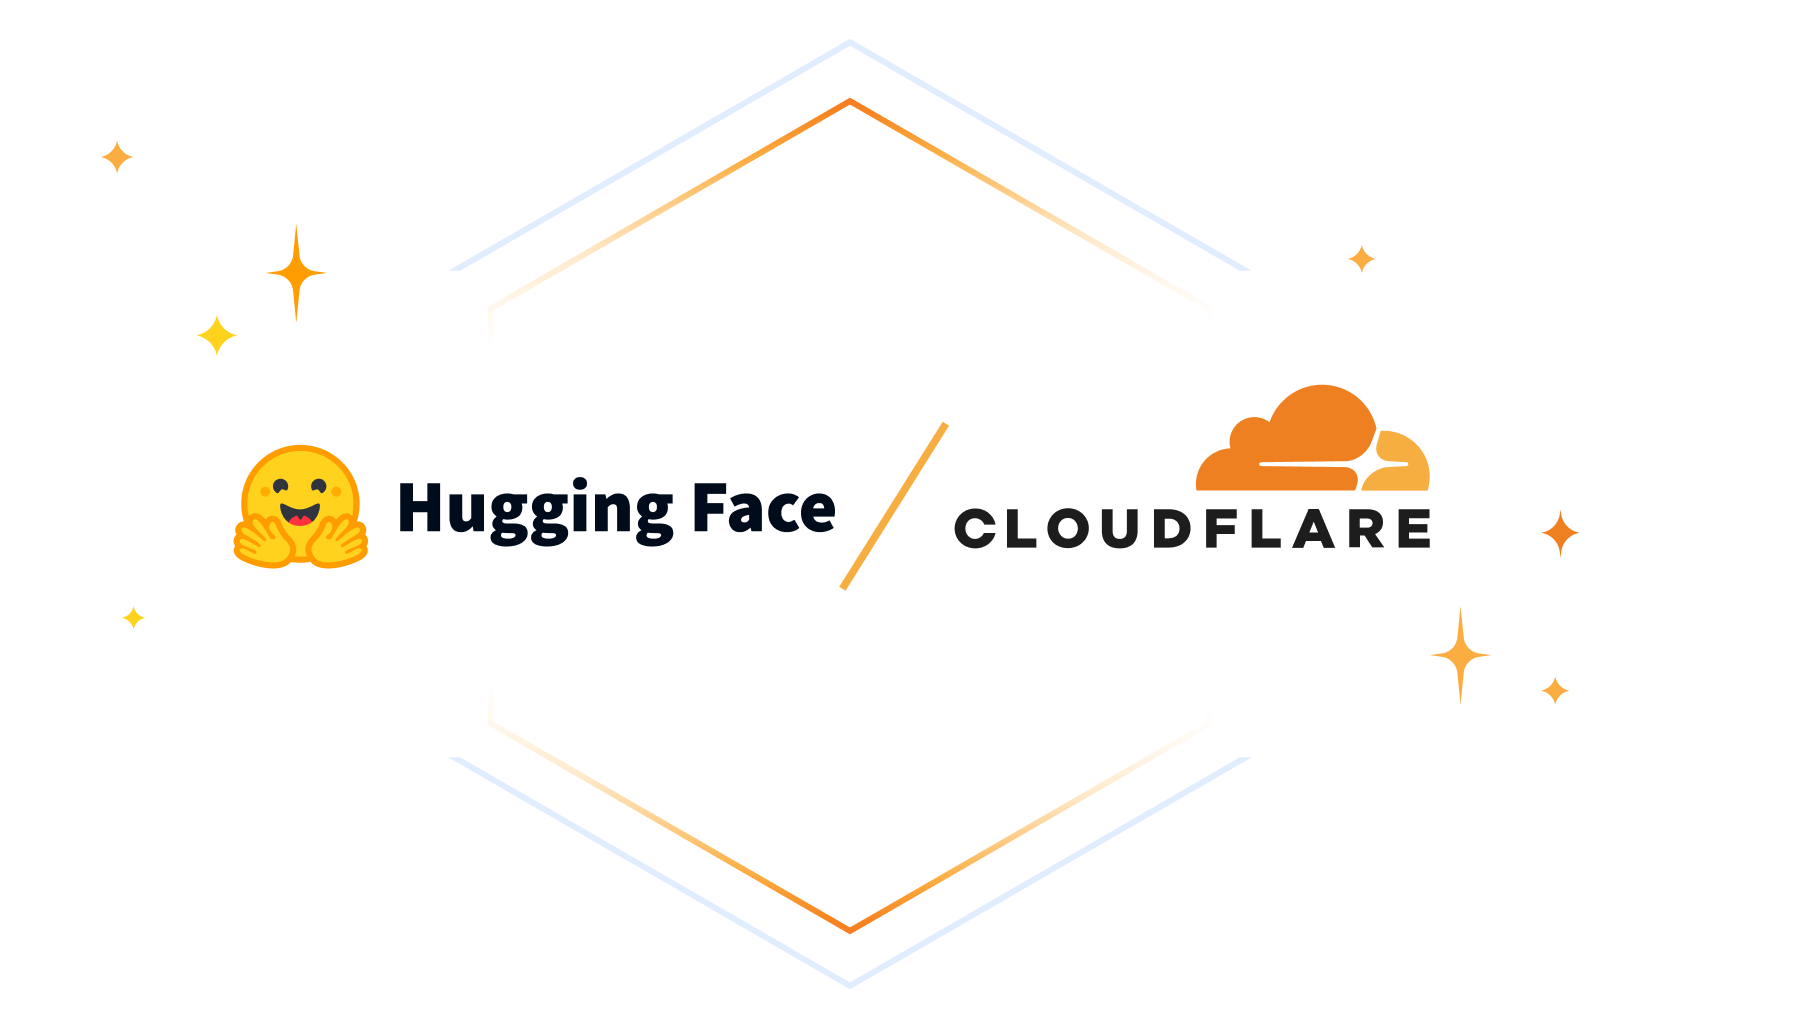 Partnering with Hugging Face to make deploying AI easier and more affordable than ever ðŸ¤—